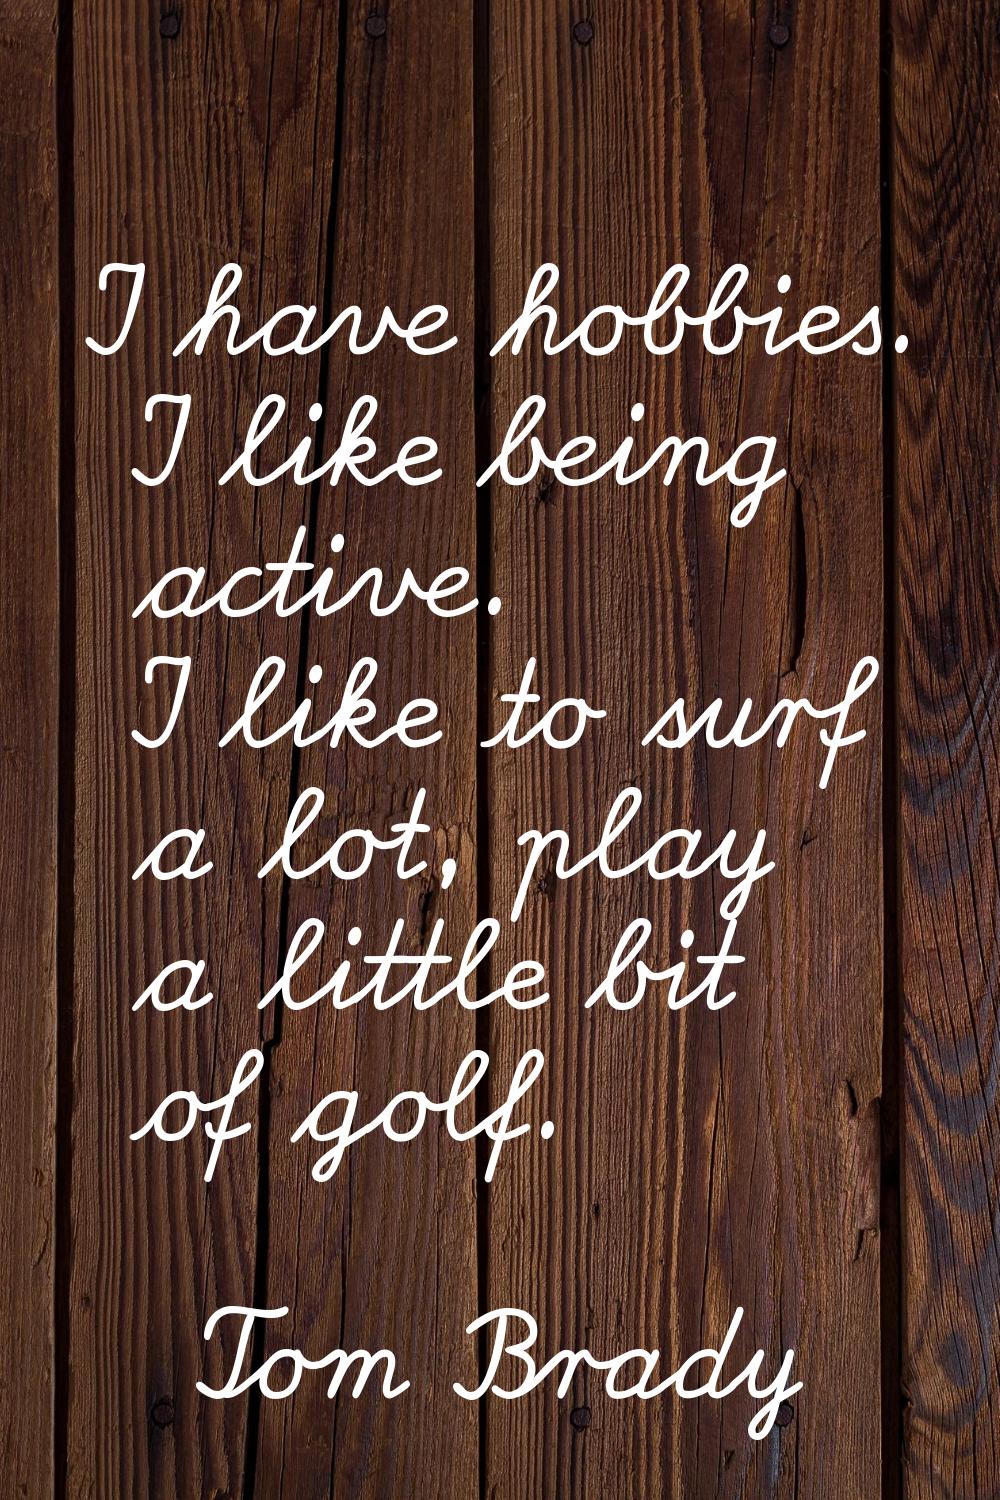 I have hobbies. I like being active. I like to surf a lot, play a little bit of golf.